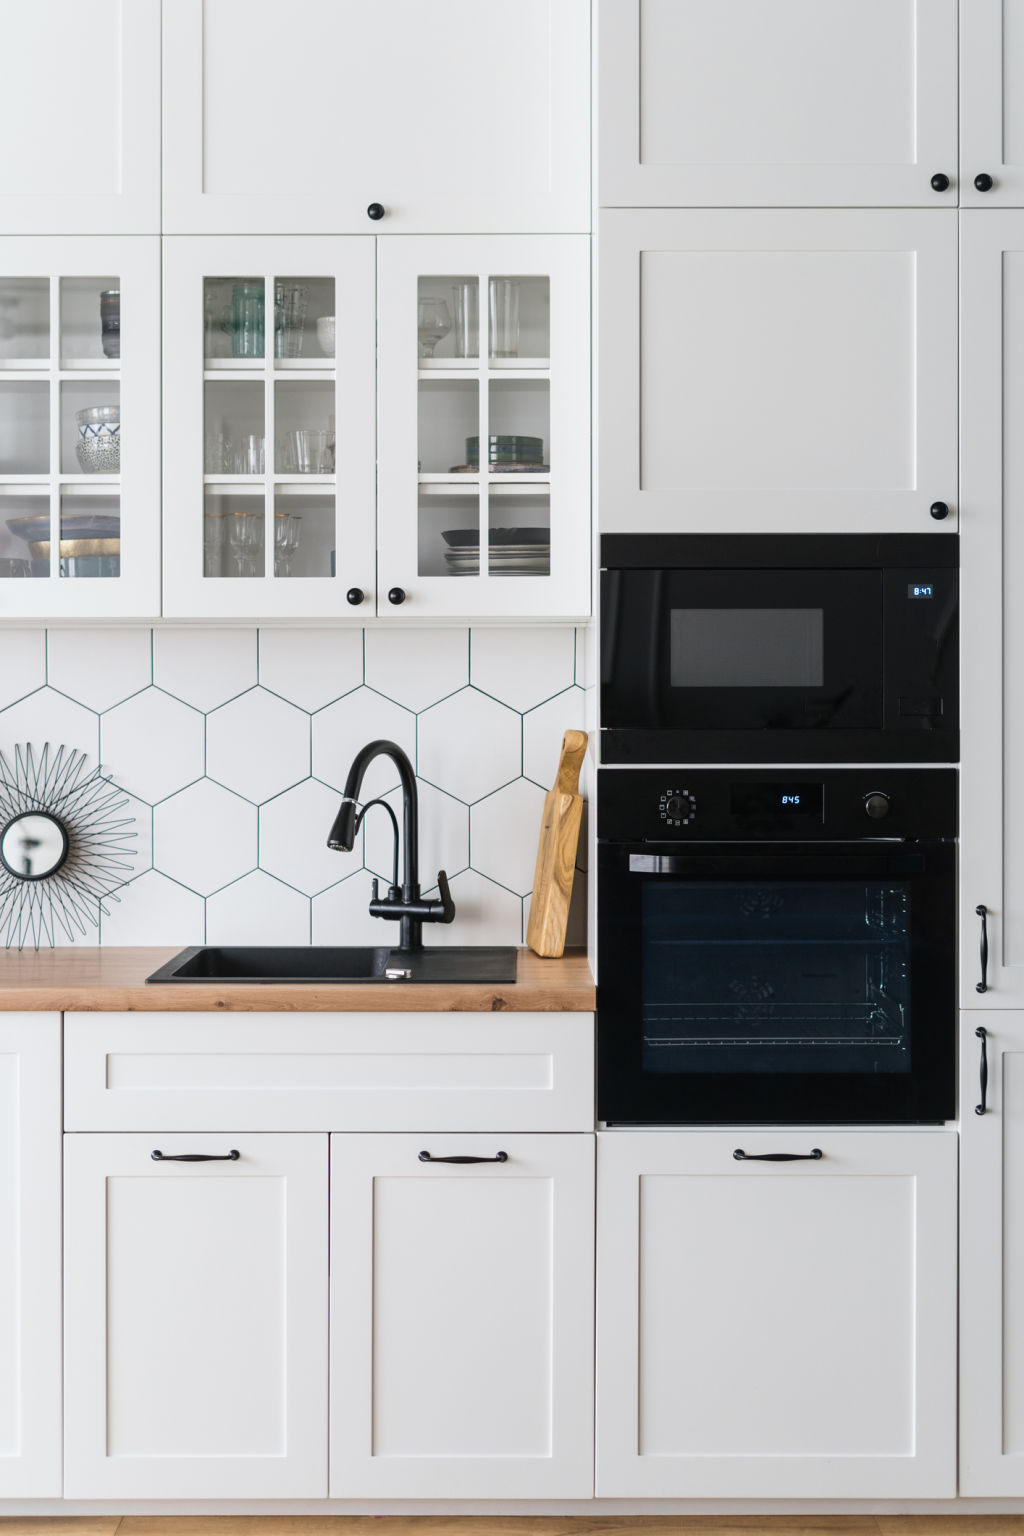 Updating taps, mixers, spouts, doorknobs and handles can deliver a transformative look for less. Photo: iStock